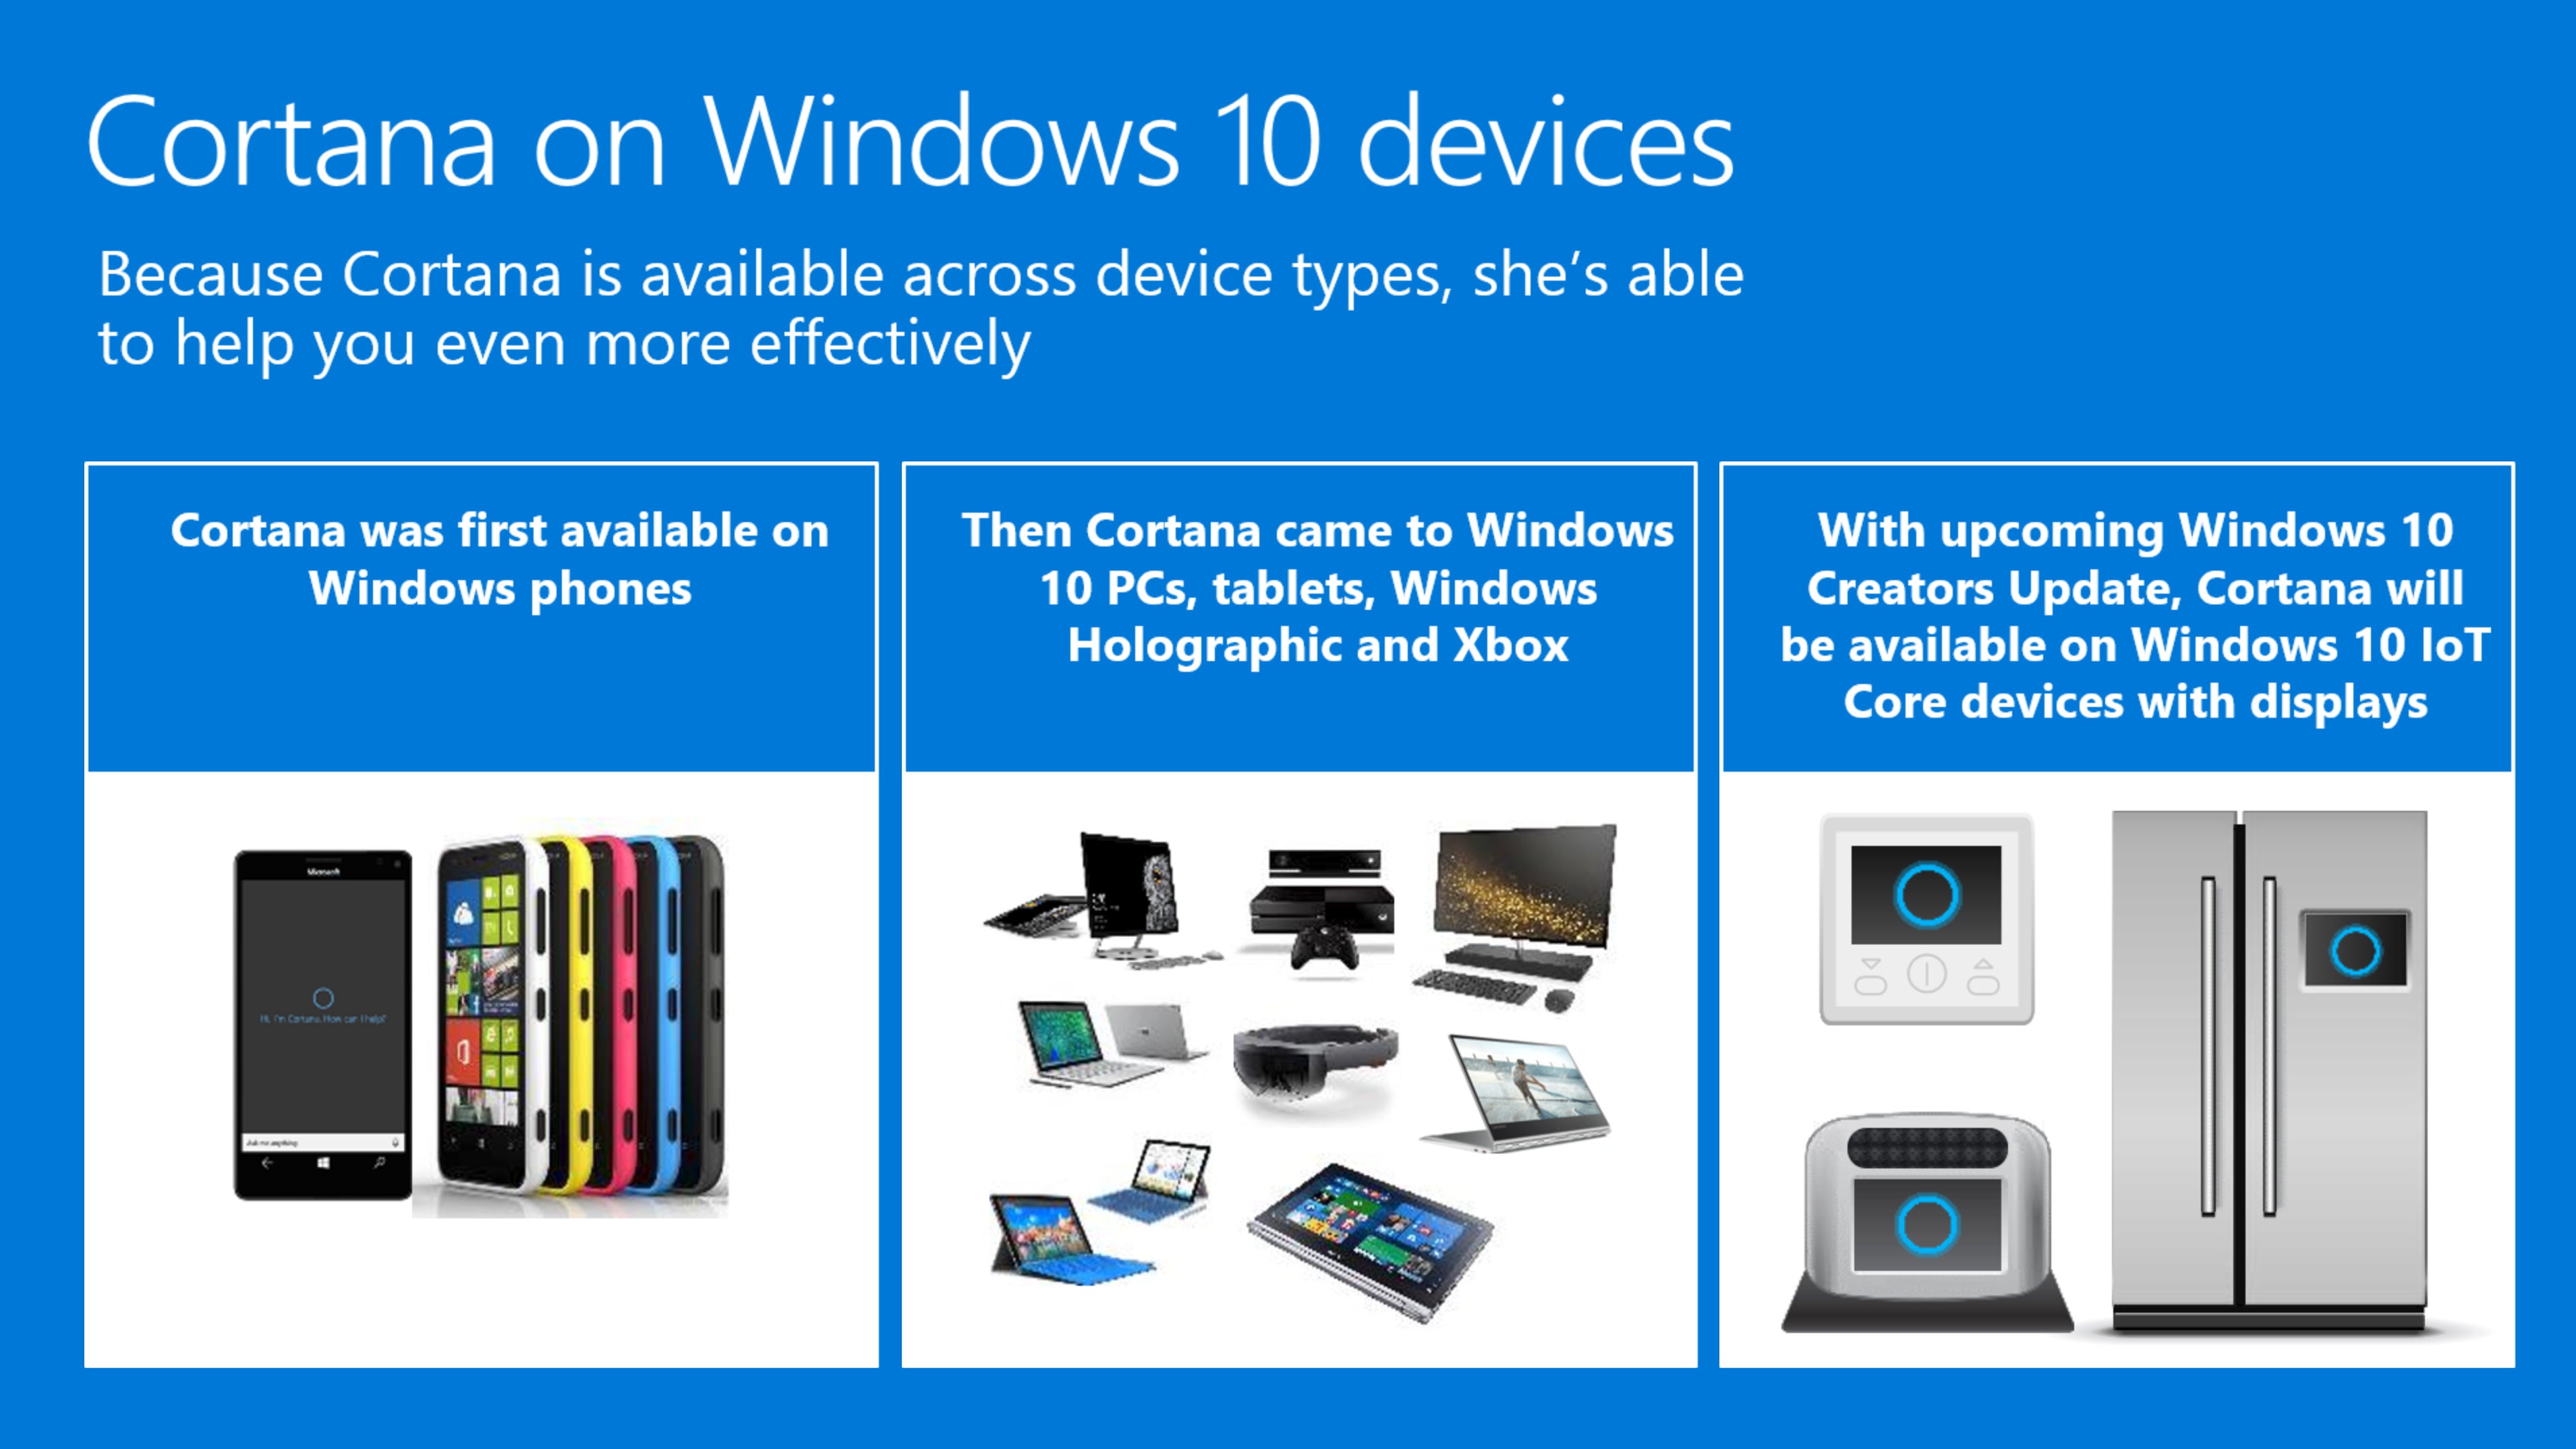 Microsoft wants Cortana to be in everything